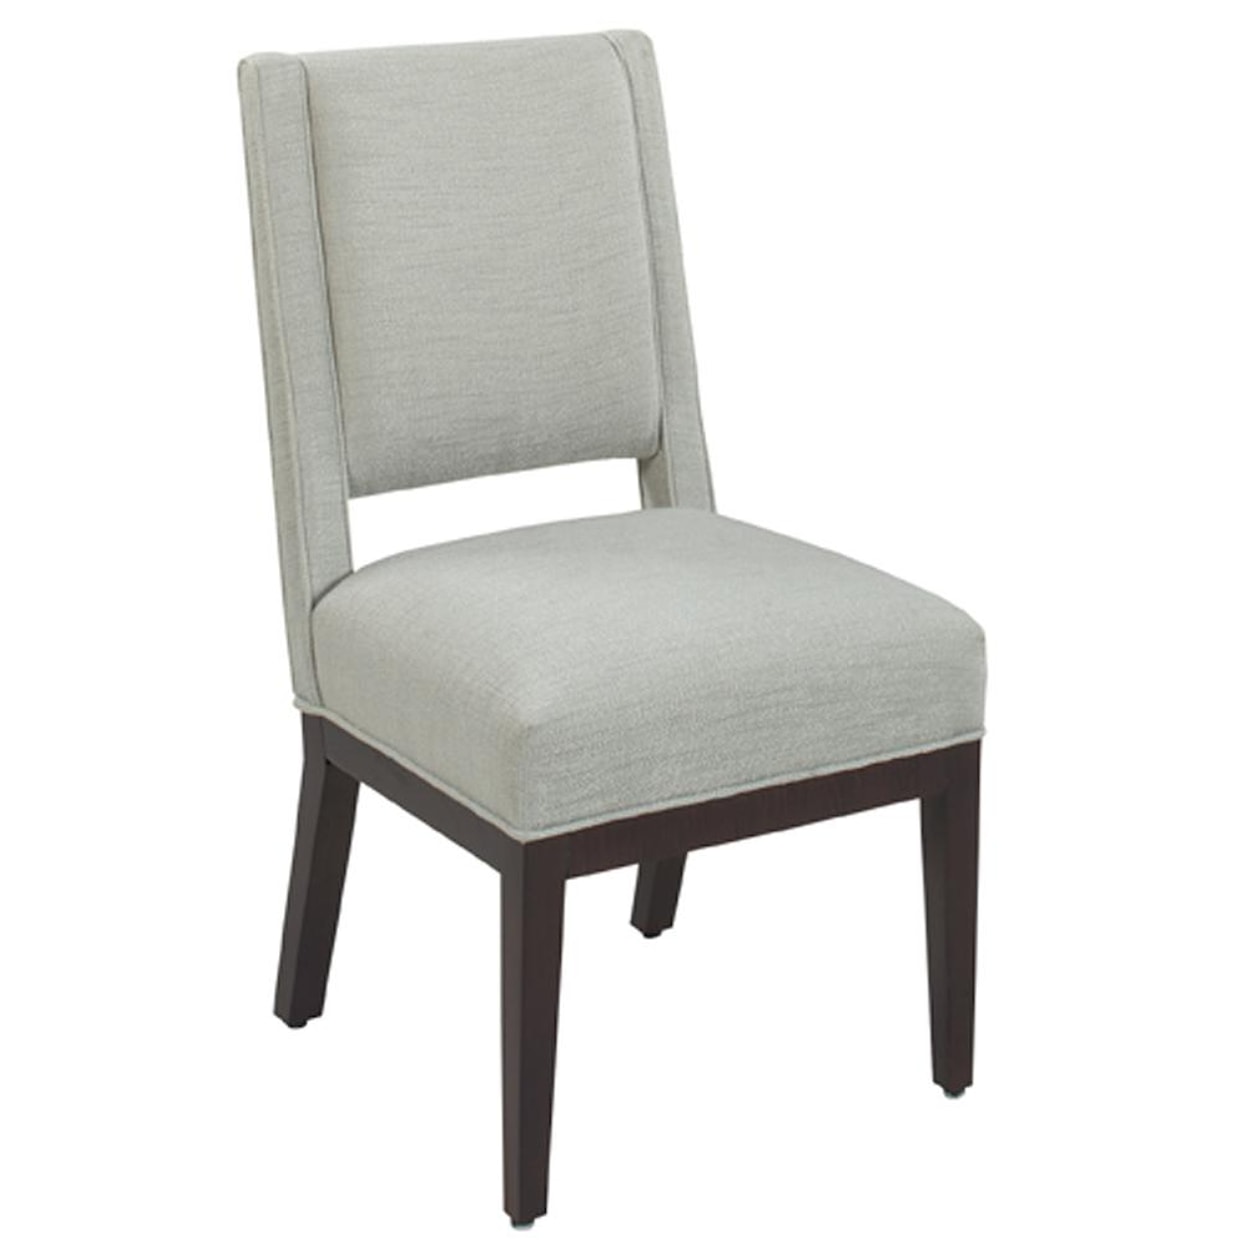 Designmaster Chairs  Miami Side Chair